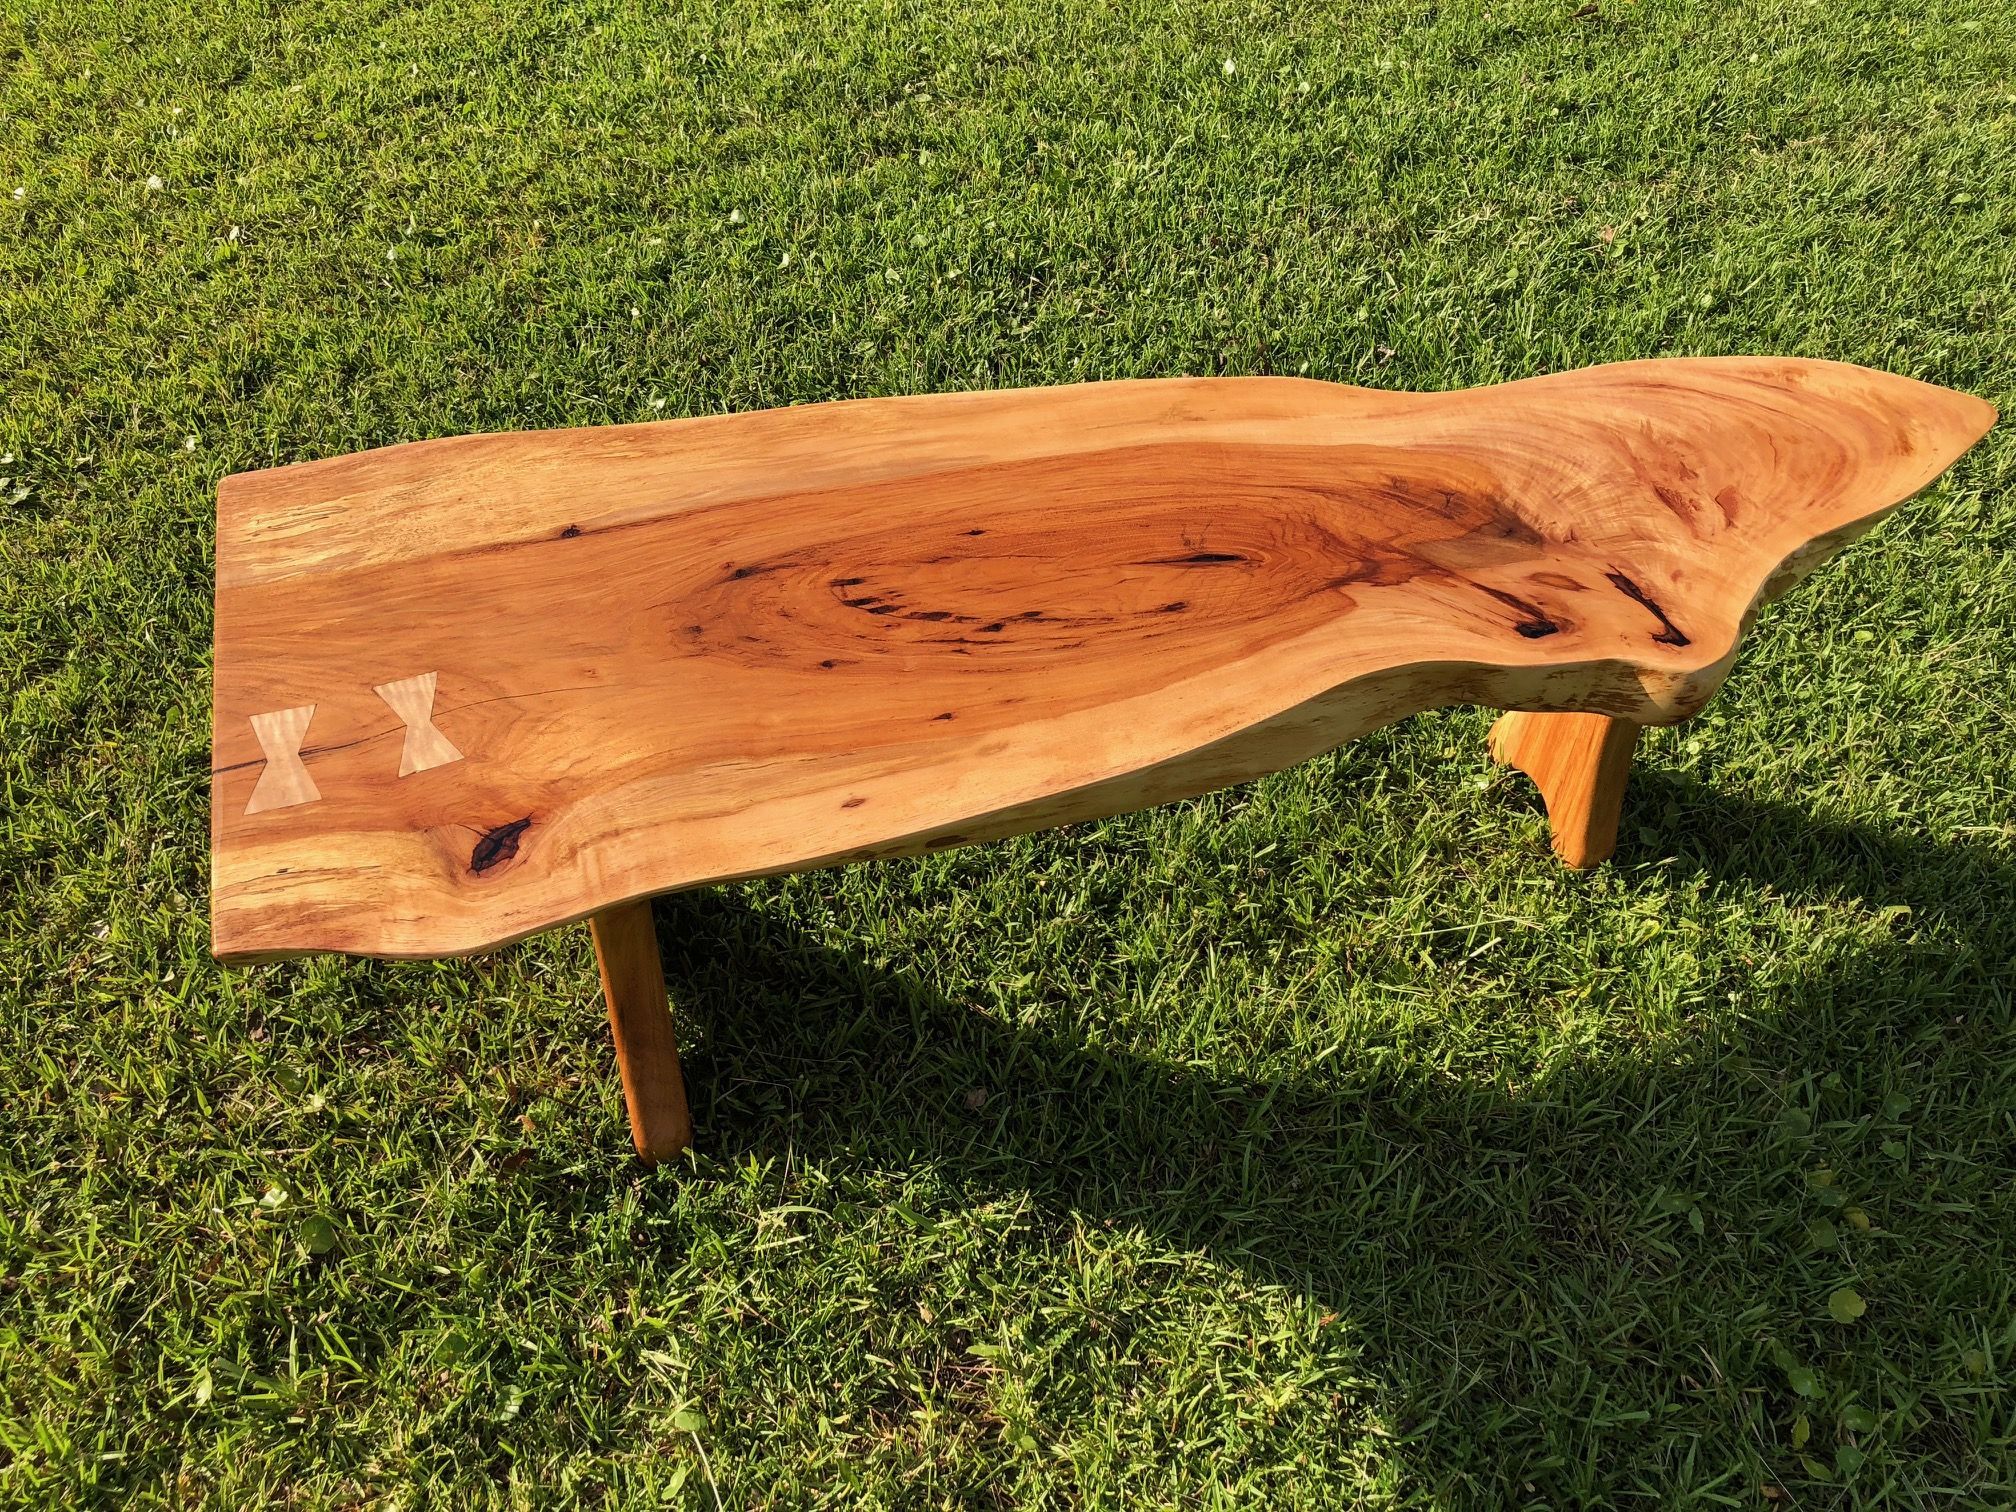 Pecan Slab Coffee Table, Custom Madeaugie's Woodcrafts With Regard To Warm Pecan Coffee Tables (View 10 of 15)